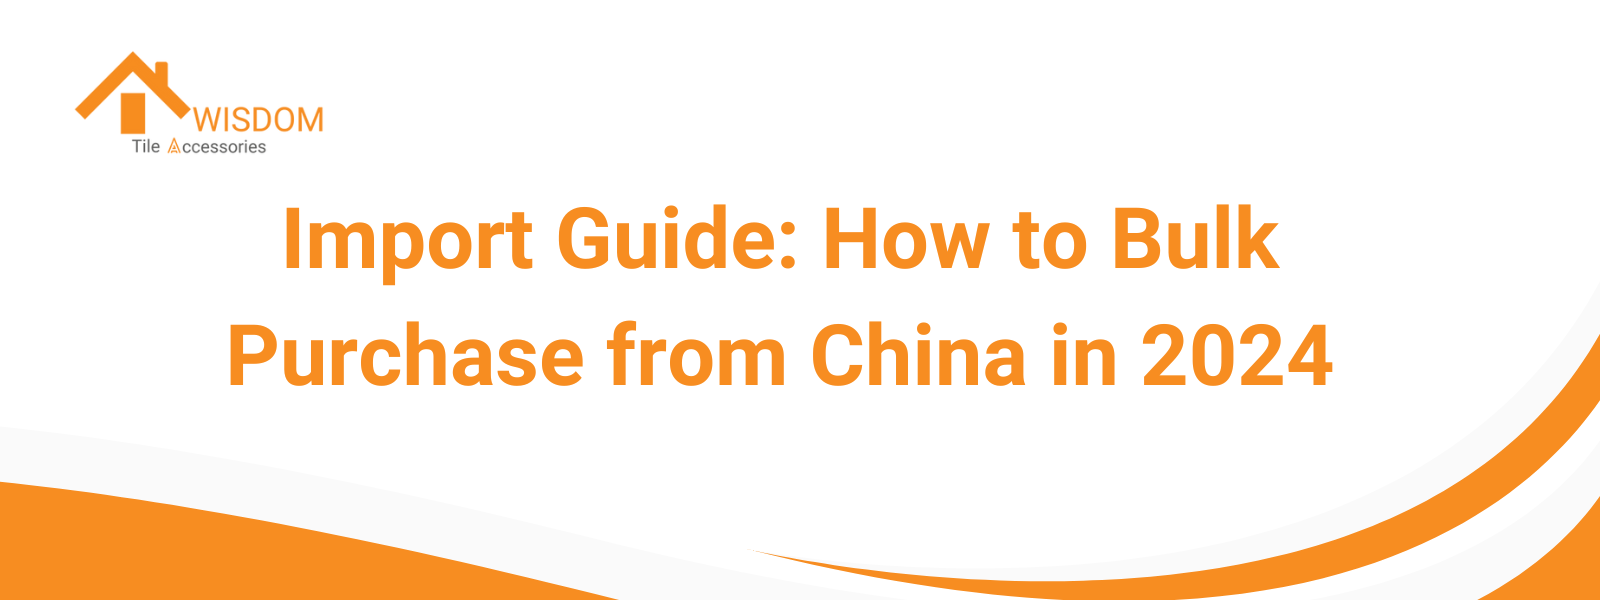 Import Guide: How to Bulk Purchase from China in 2024